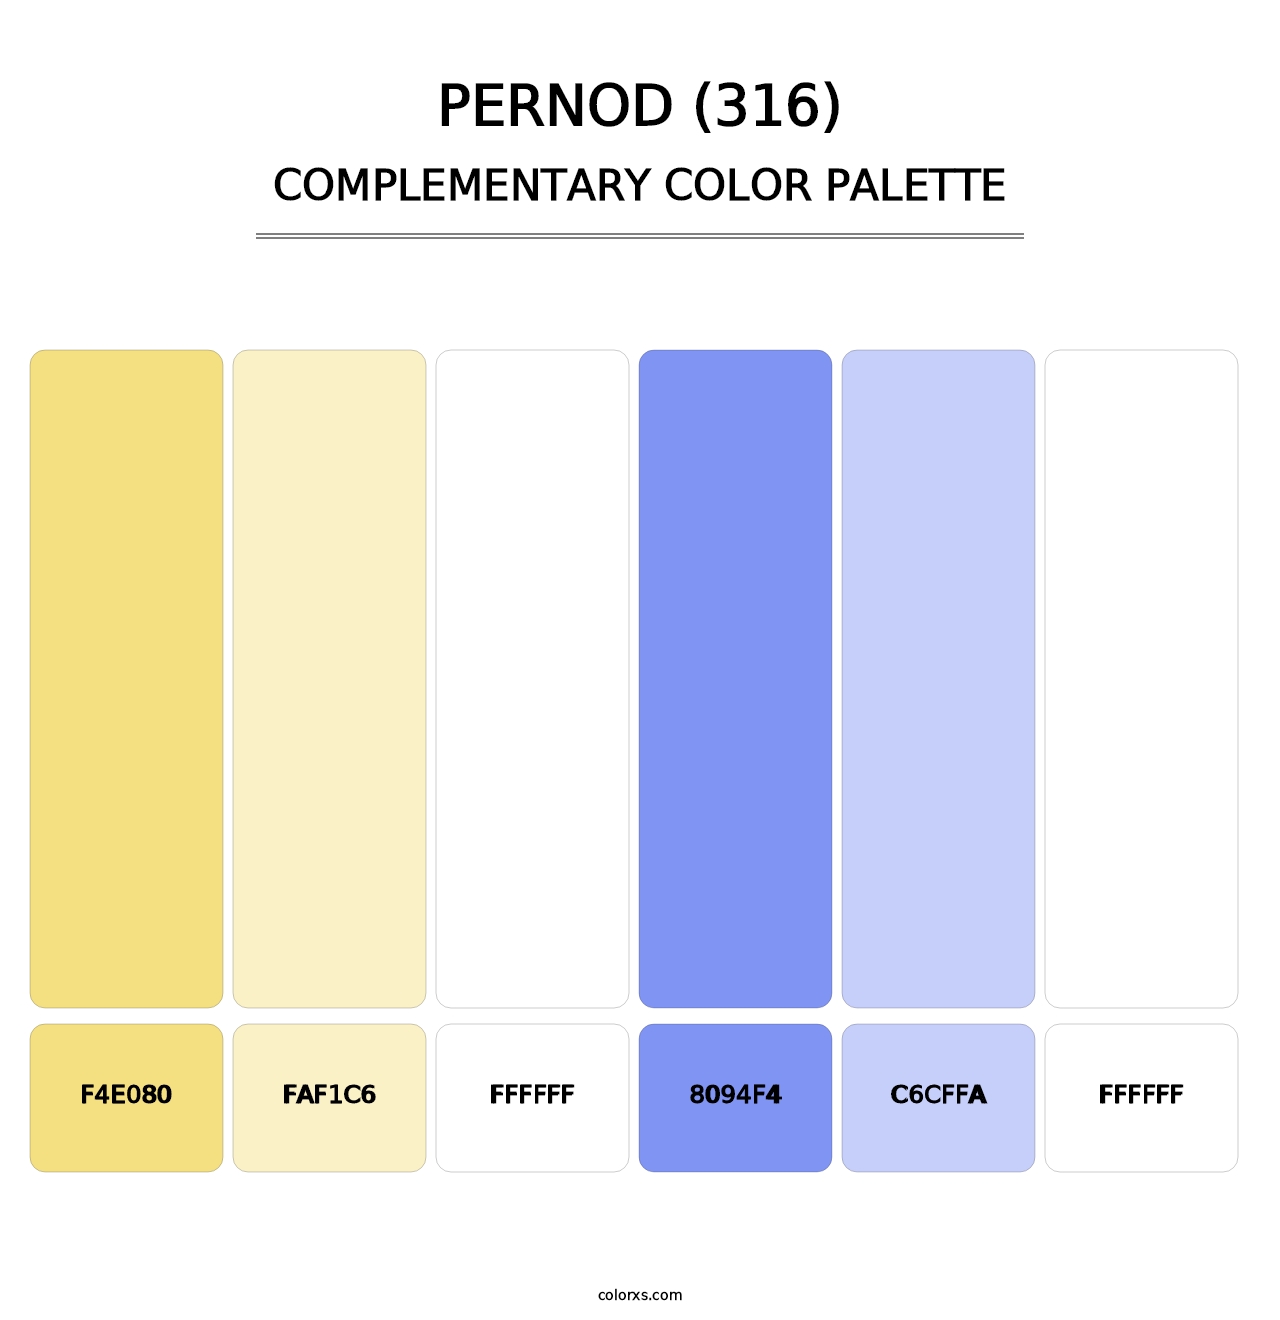 Pernod (316) - Complementary Color Palette